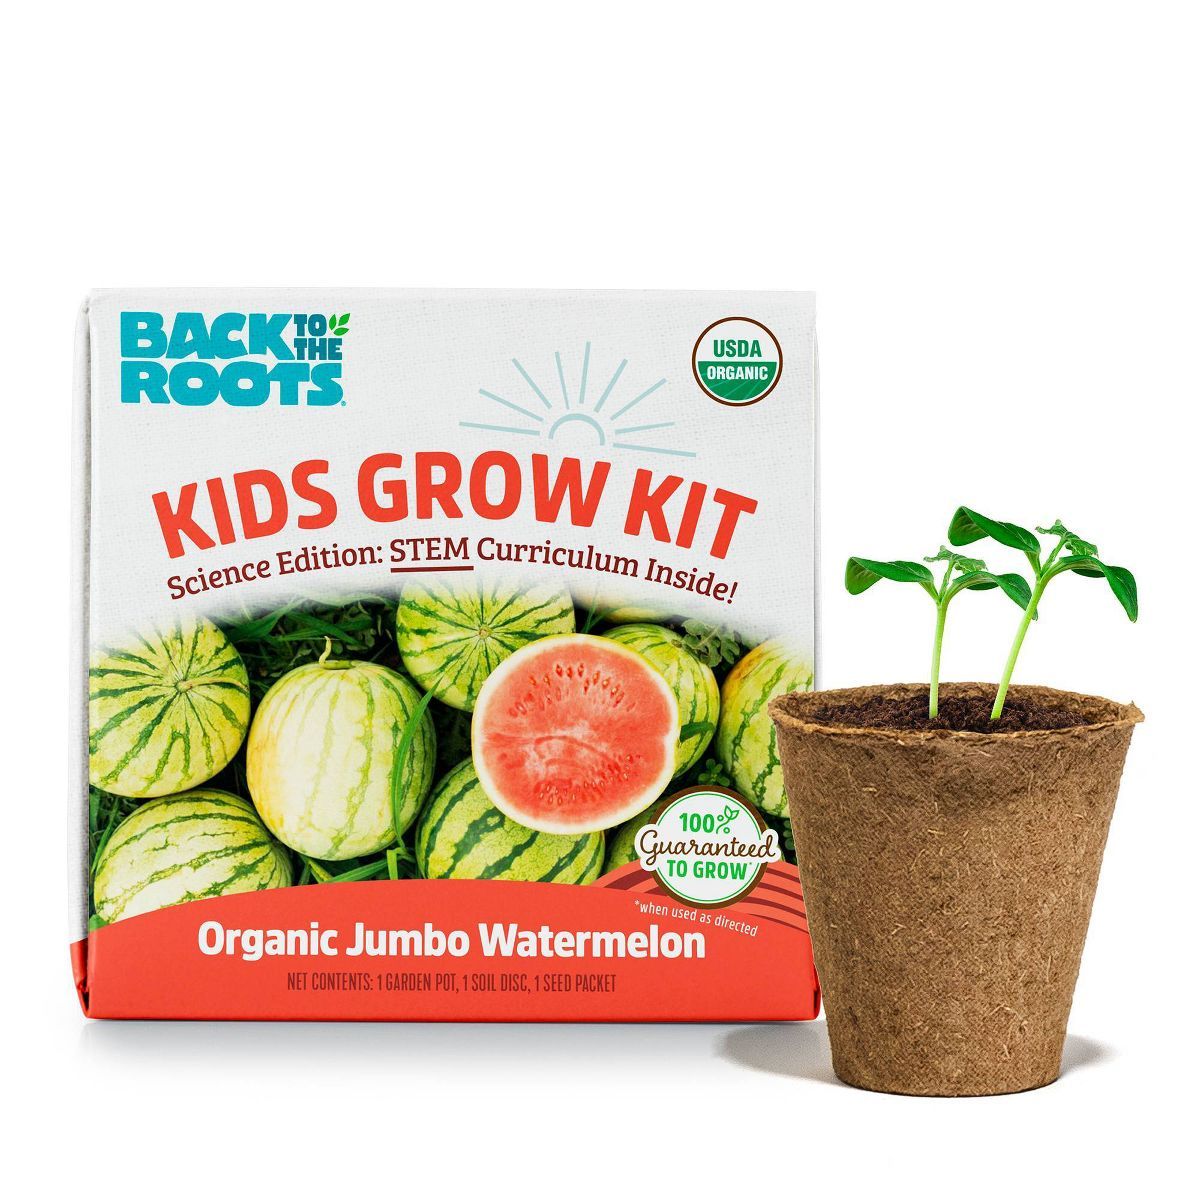 Back to the Roots Kids Grow Kit Science Edition Organic Jumbo Watermelon | Target